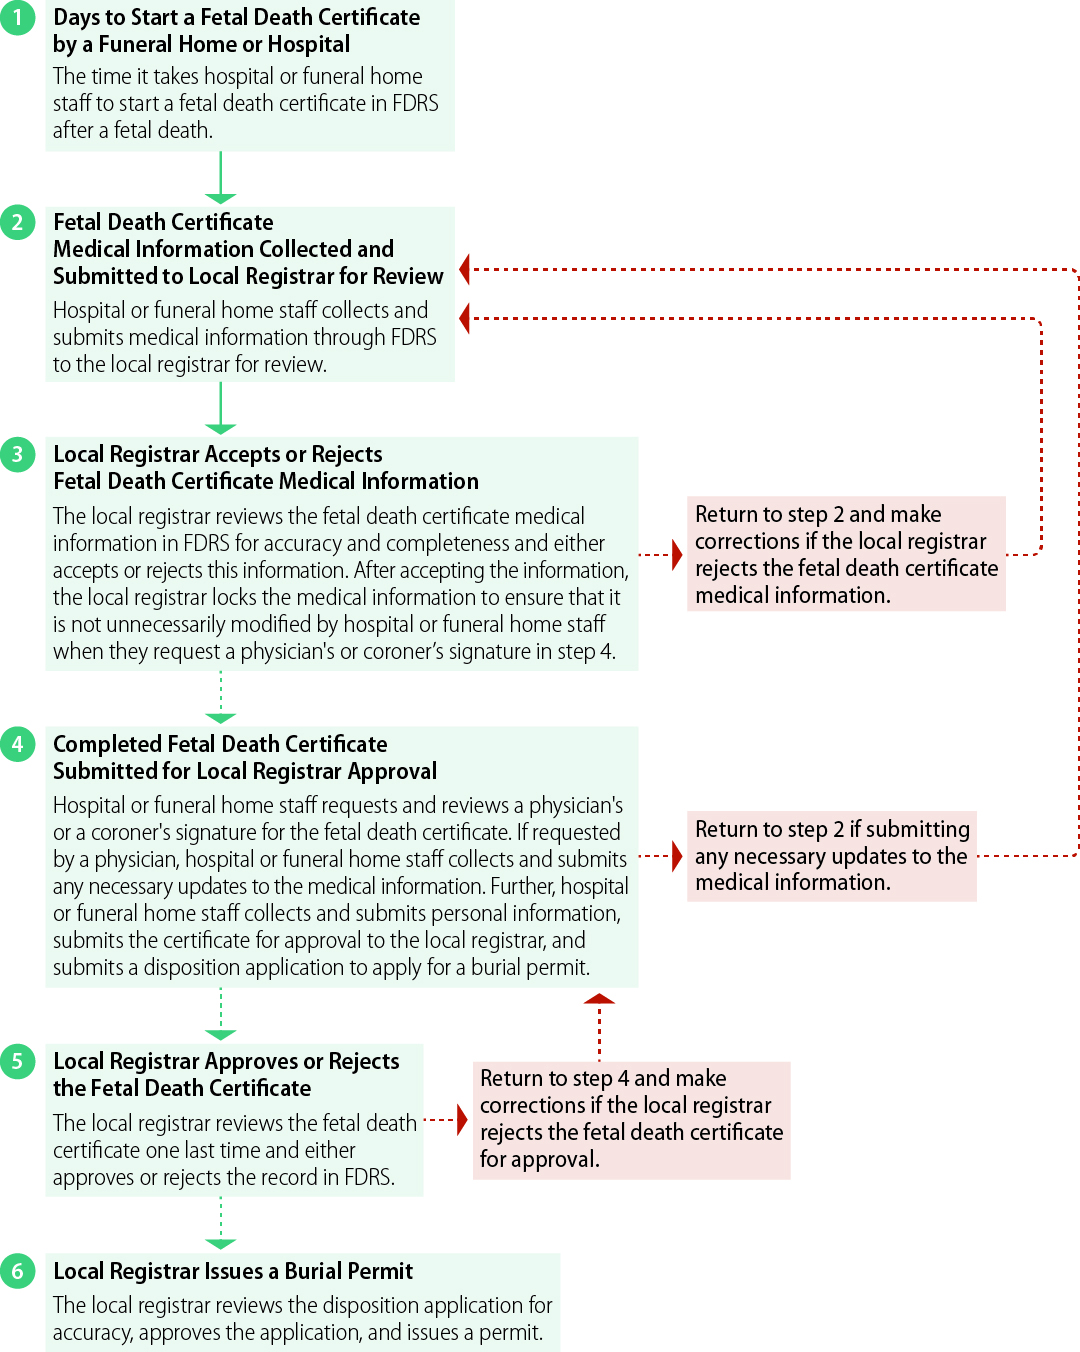 A flowchart displaying the six steps generally taken during the process of registering a fetal death certificate at the local registration district level.